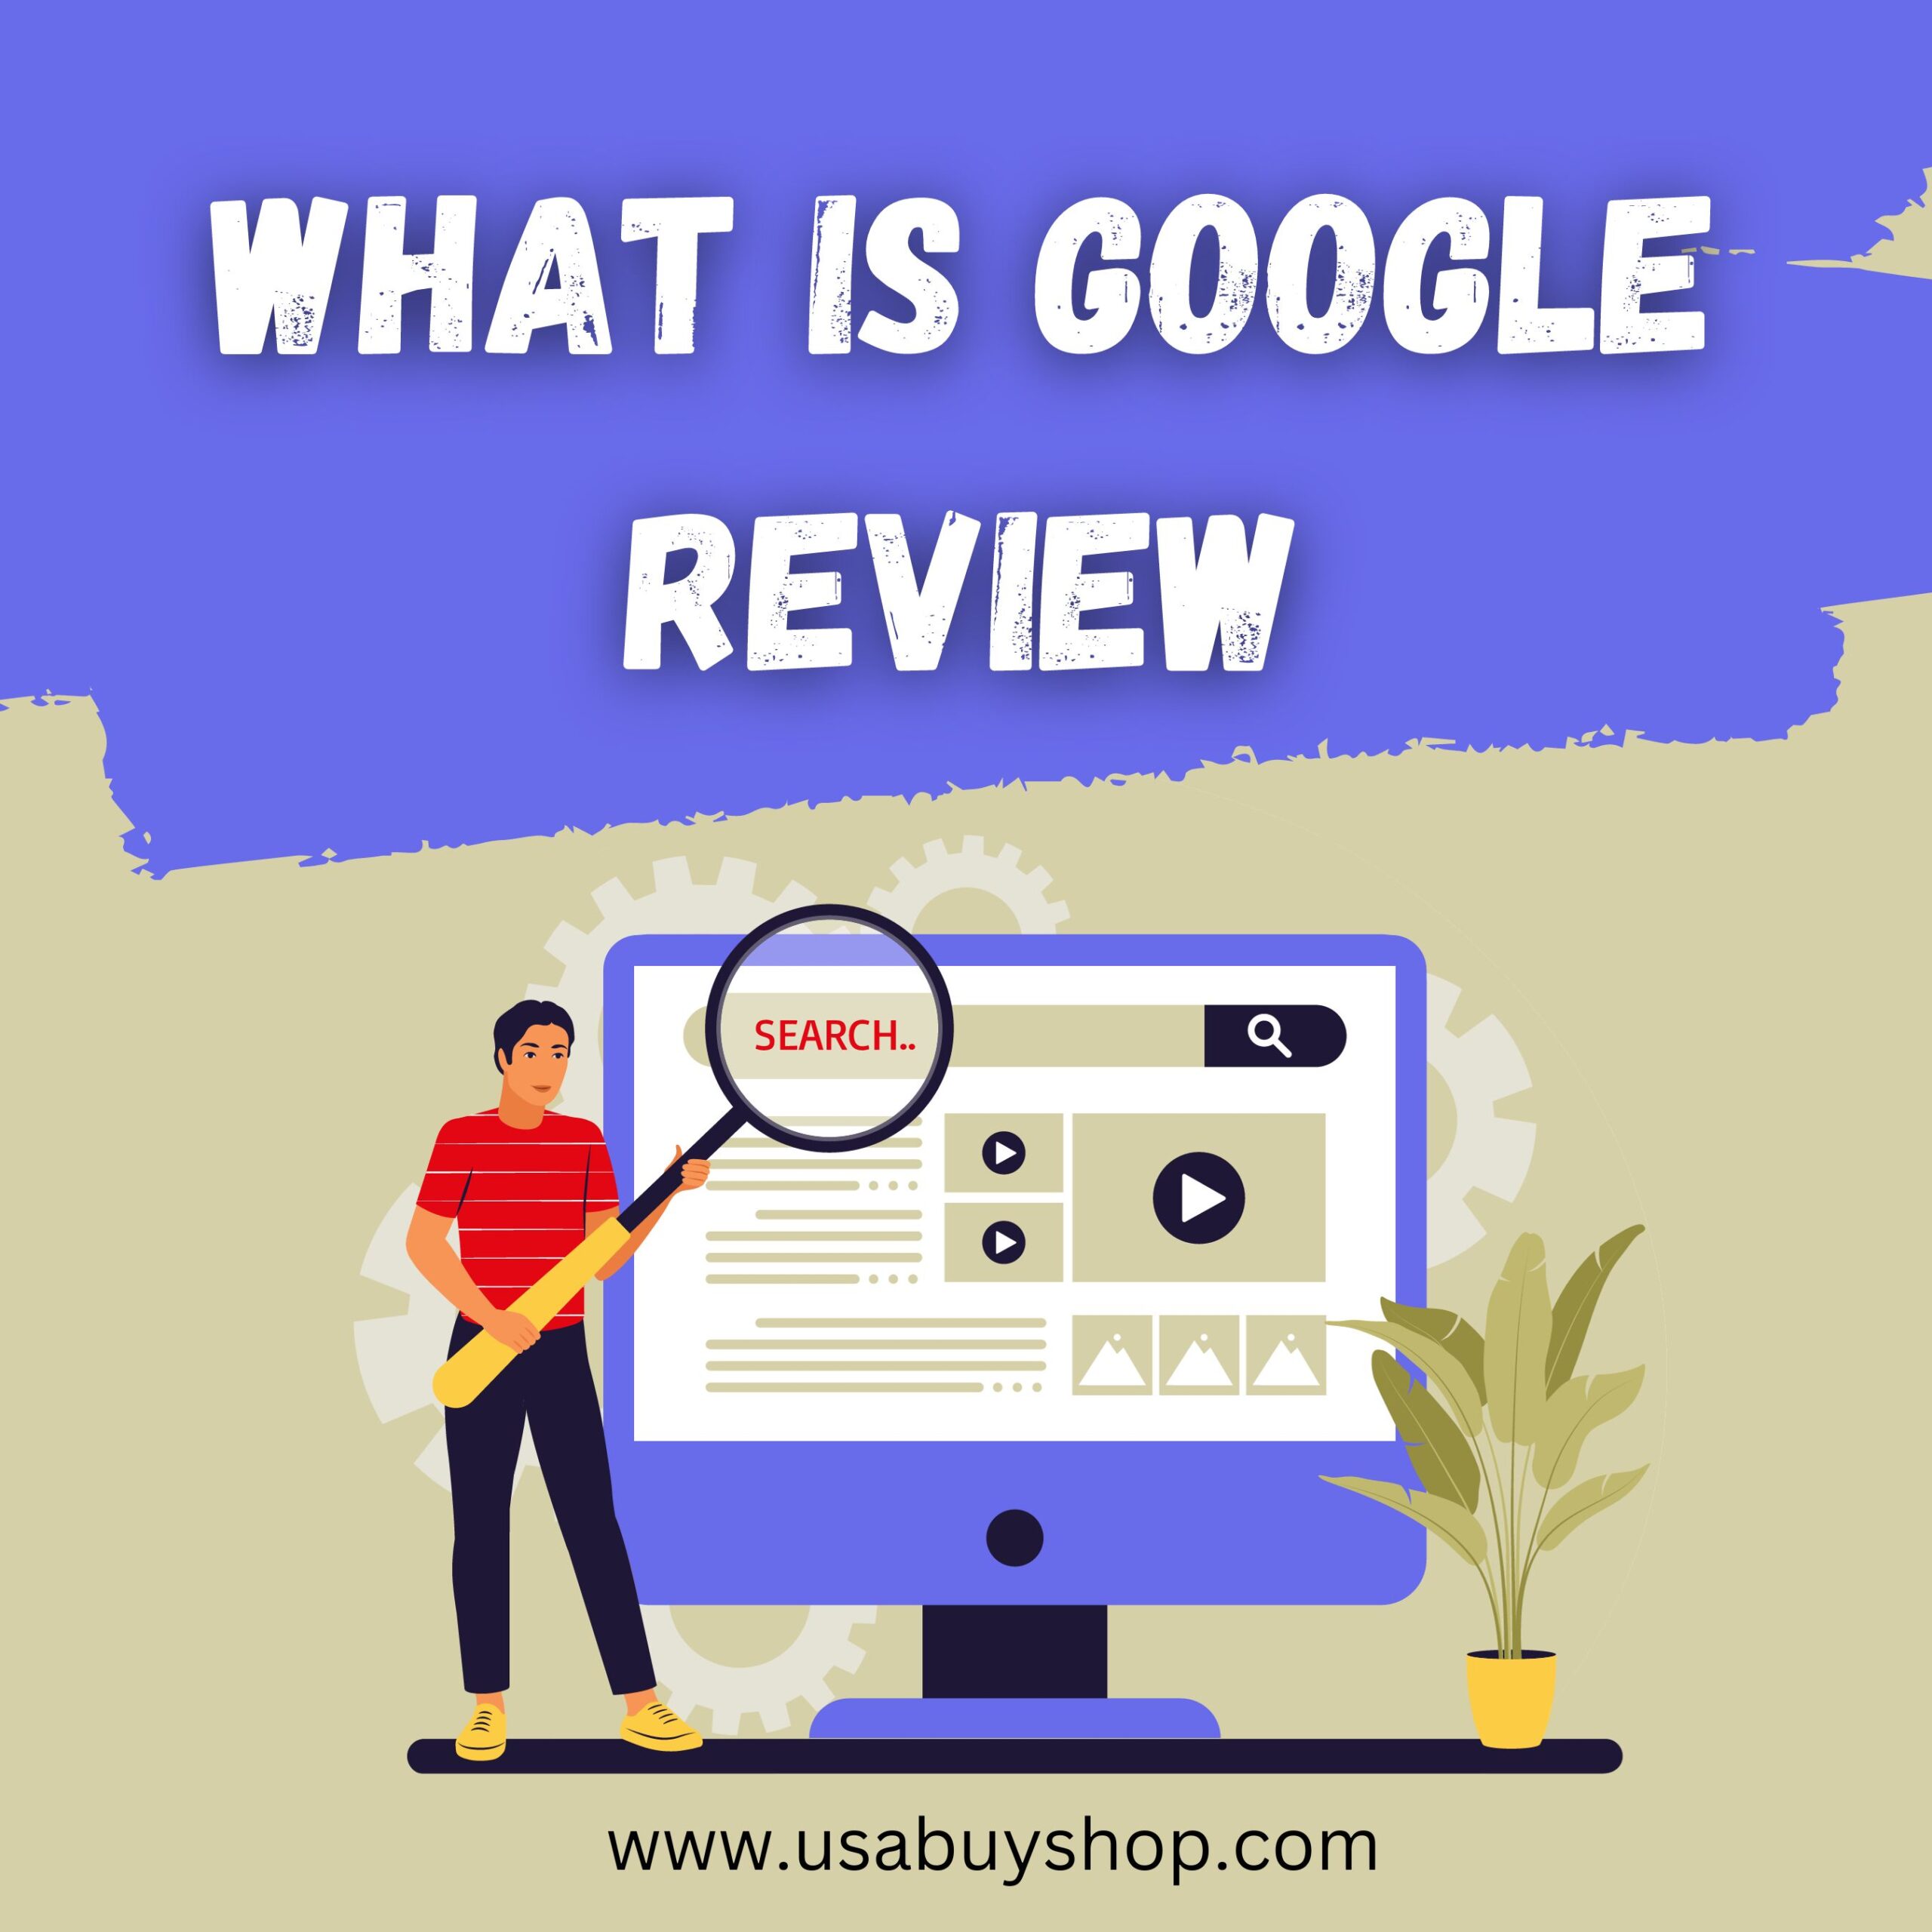 What is Google Review